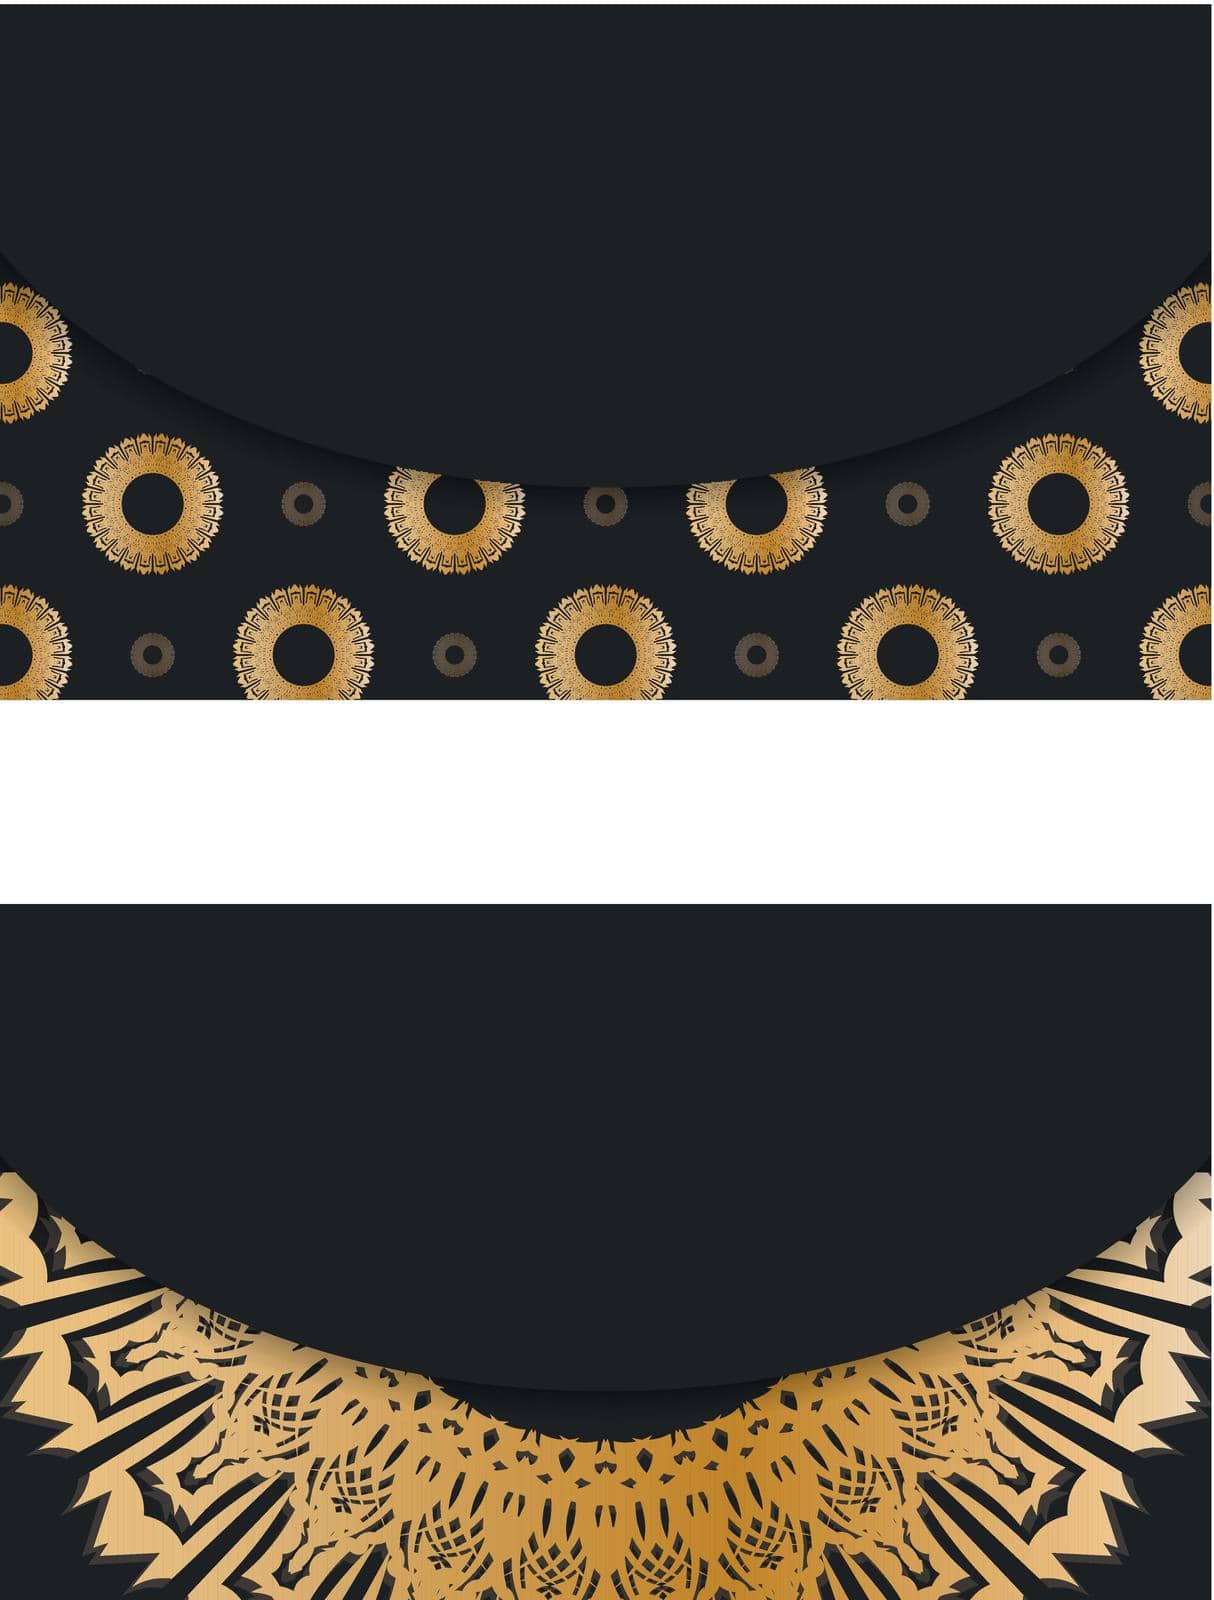 Black business card with luxurious gold ornaments for your brand. by Javvani